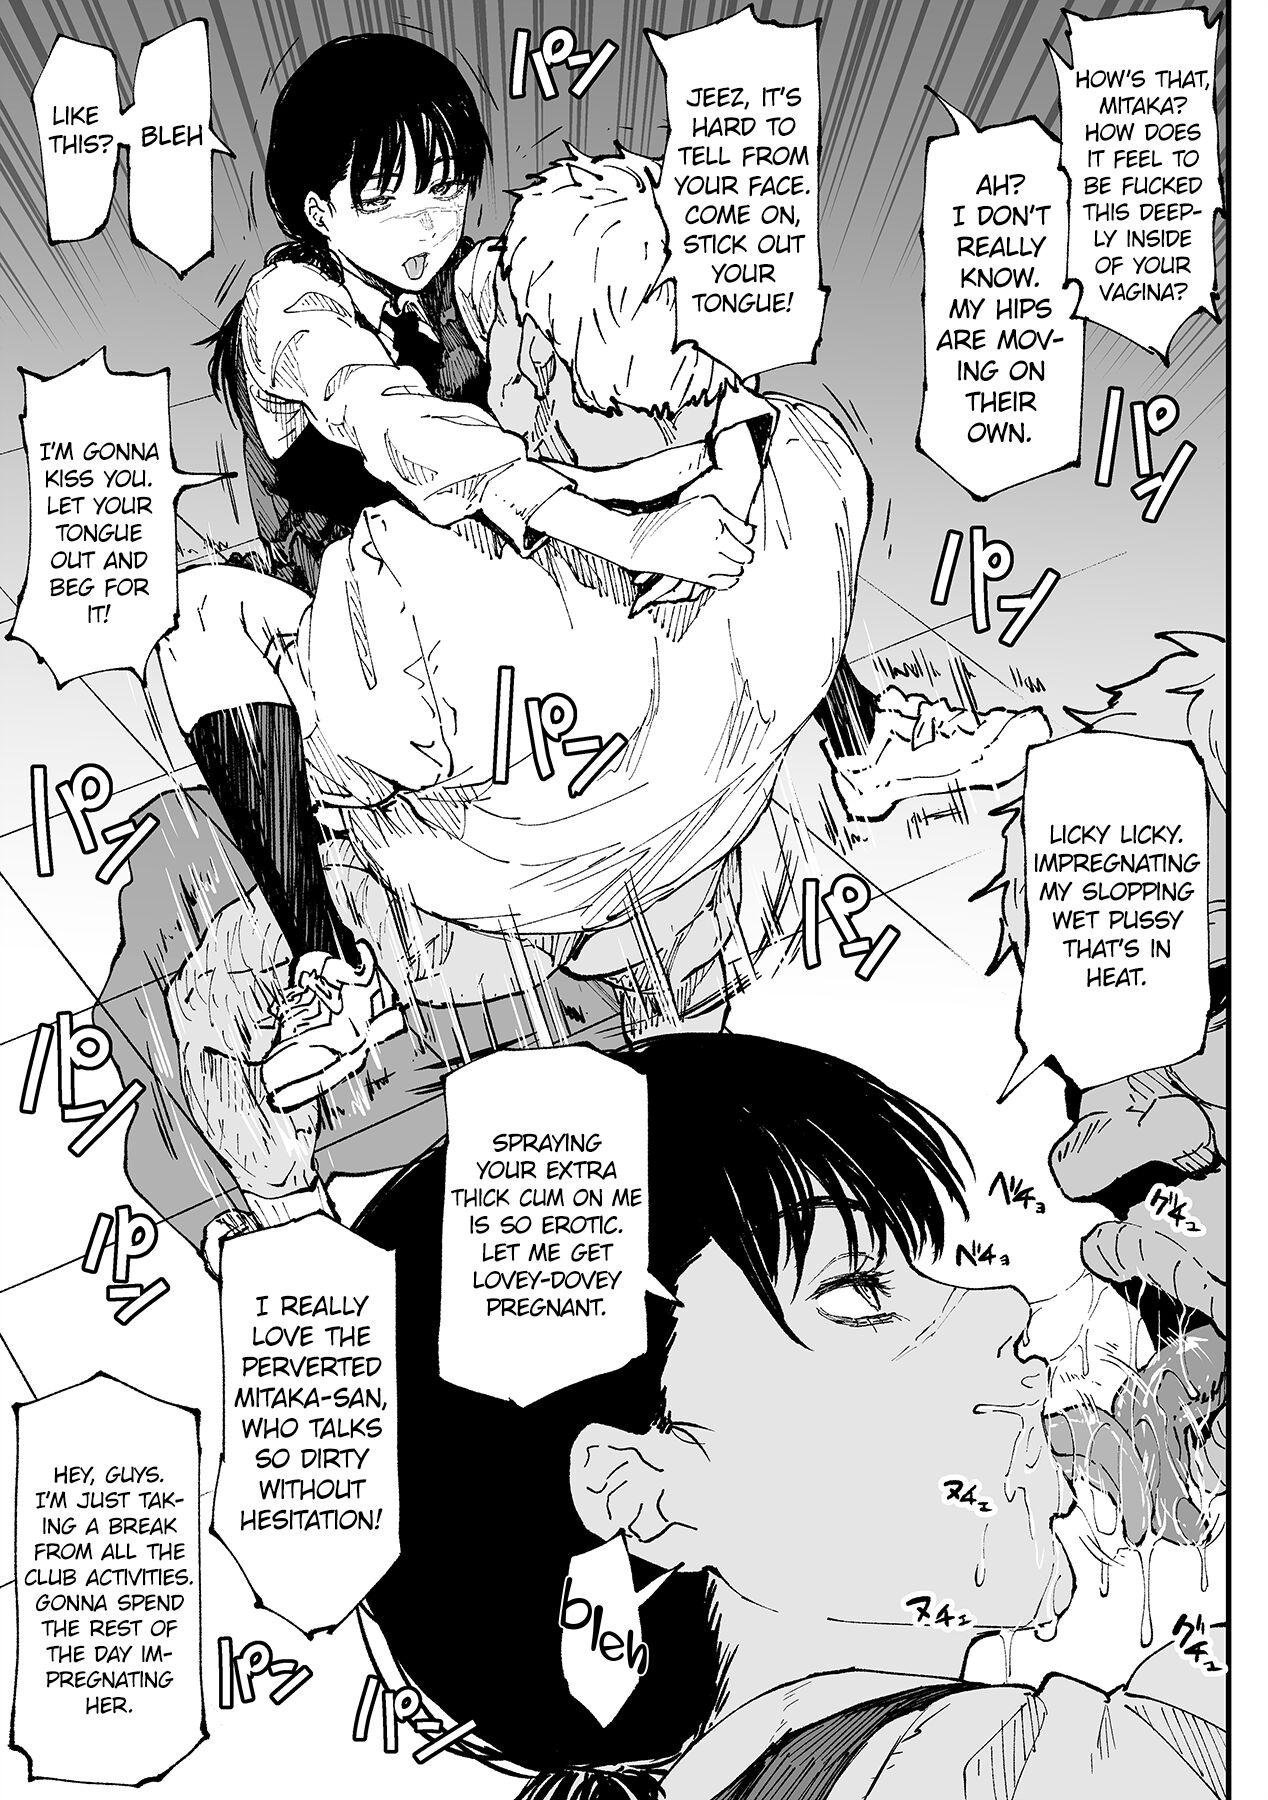 With Mitaka-san Does Her Best to Make you Hers - Chainsaw man Novia - Page 4